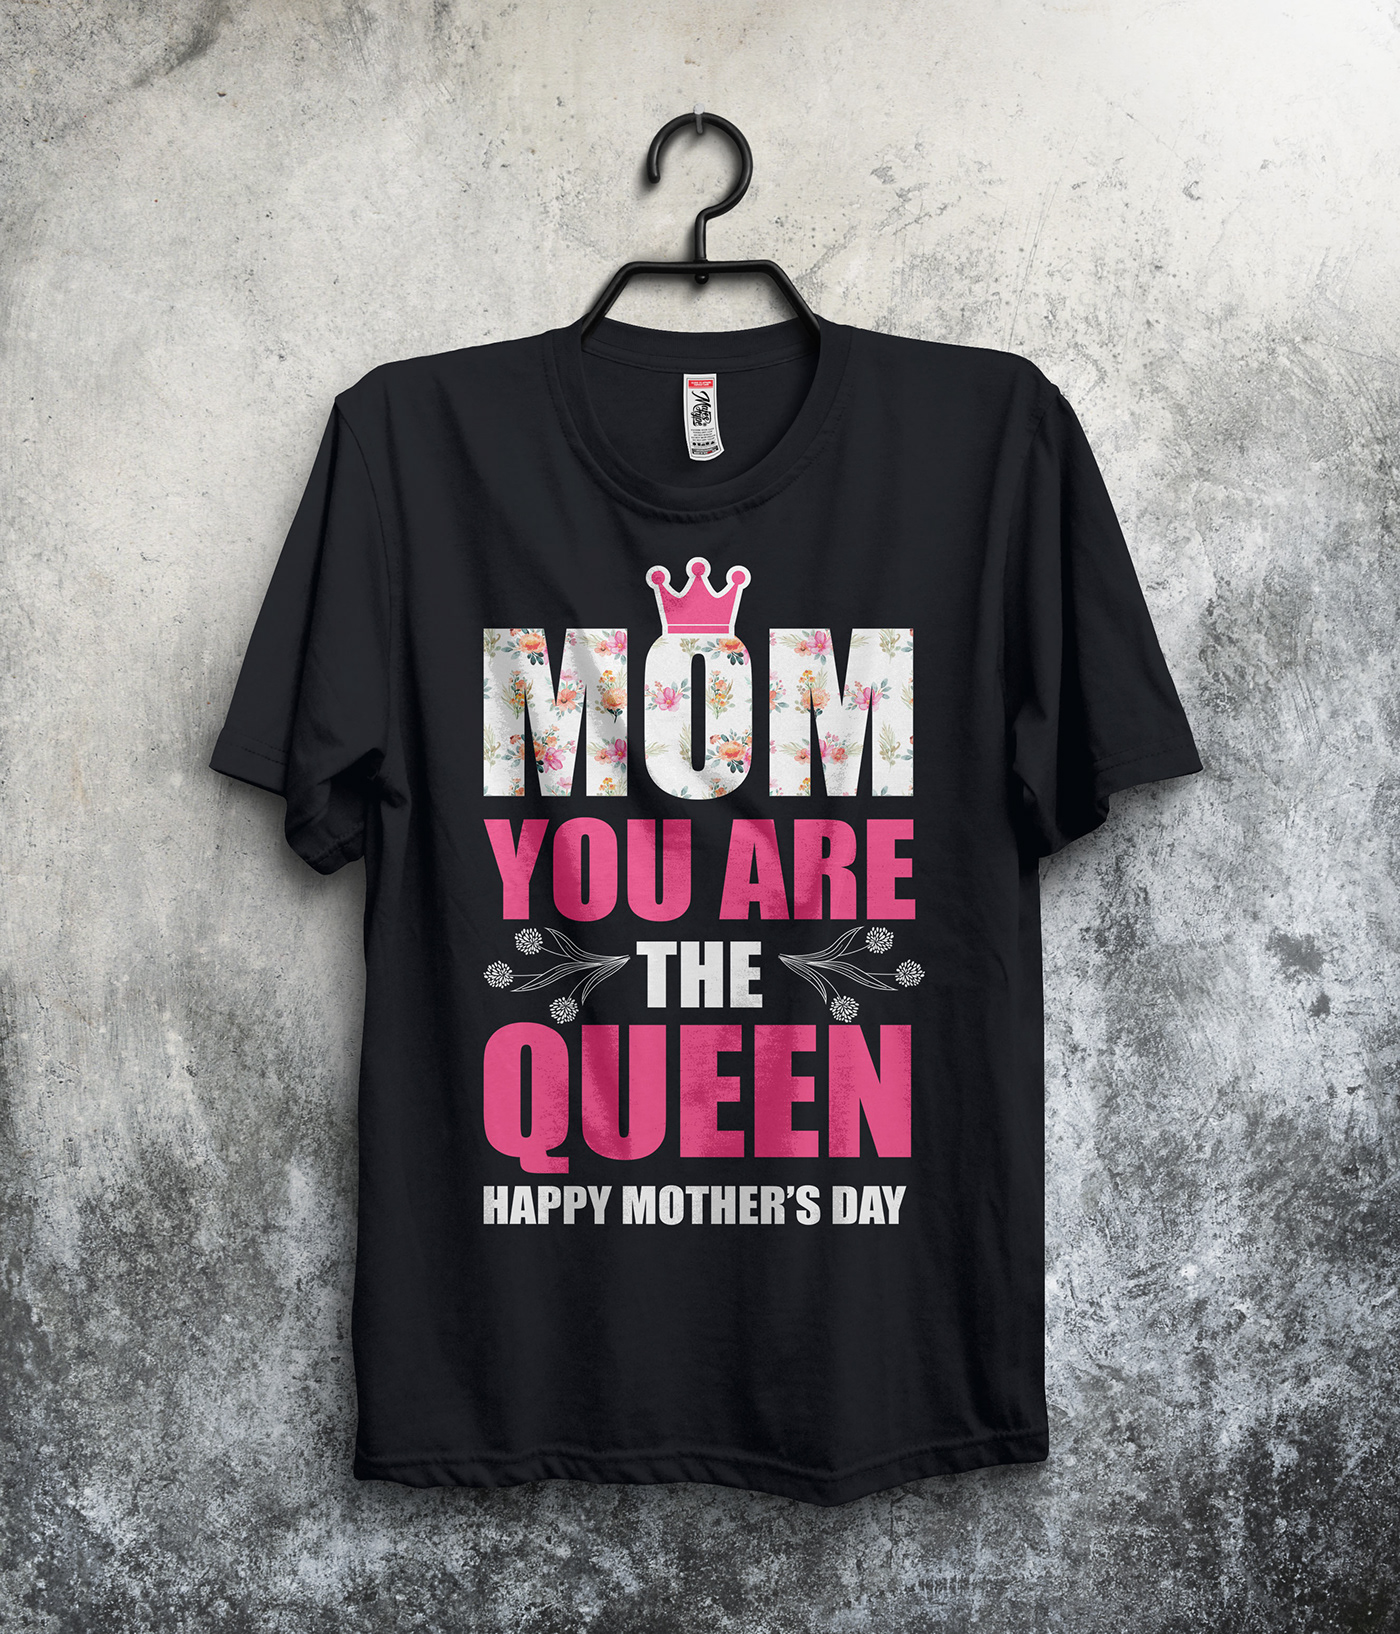 Mother's Day mothers day motherhood mother T-Shirt Design t-shirts Tshirt Design mothers mothertshirtdesign t-shirt designer